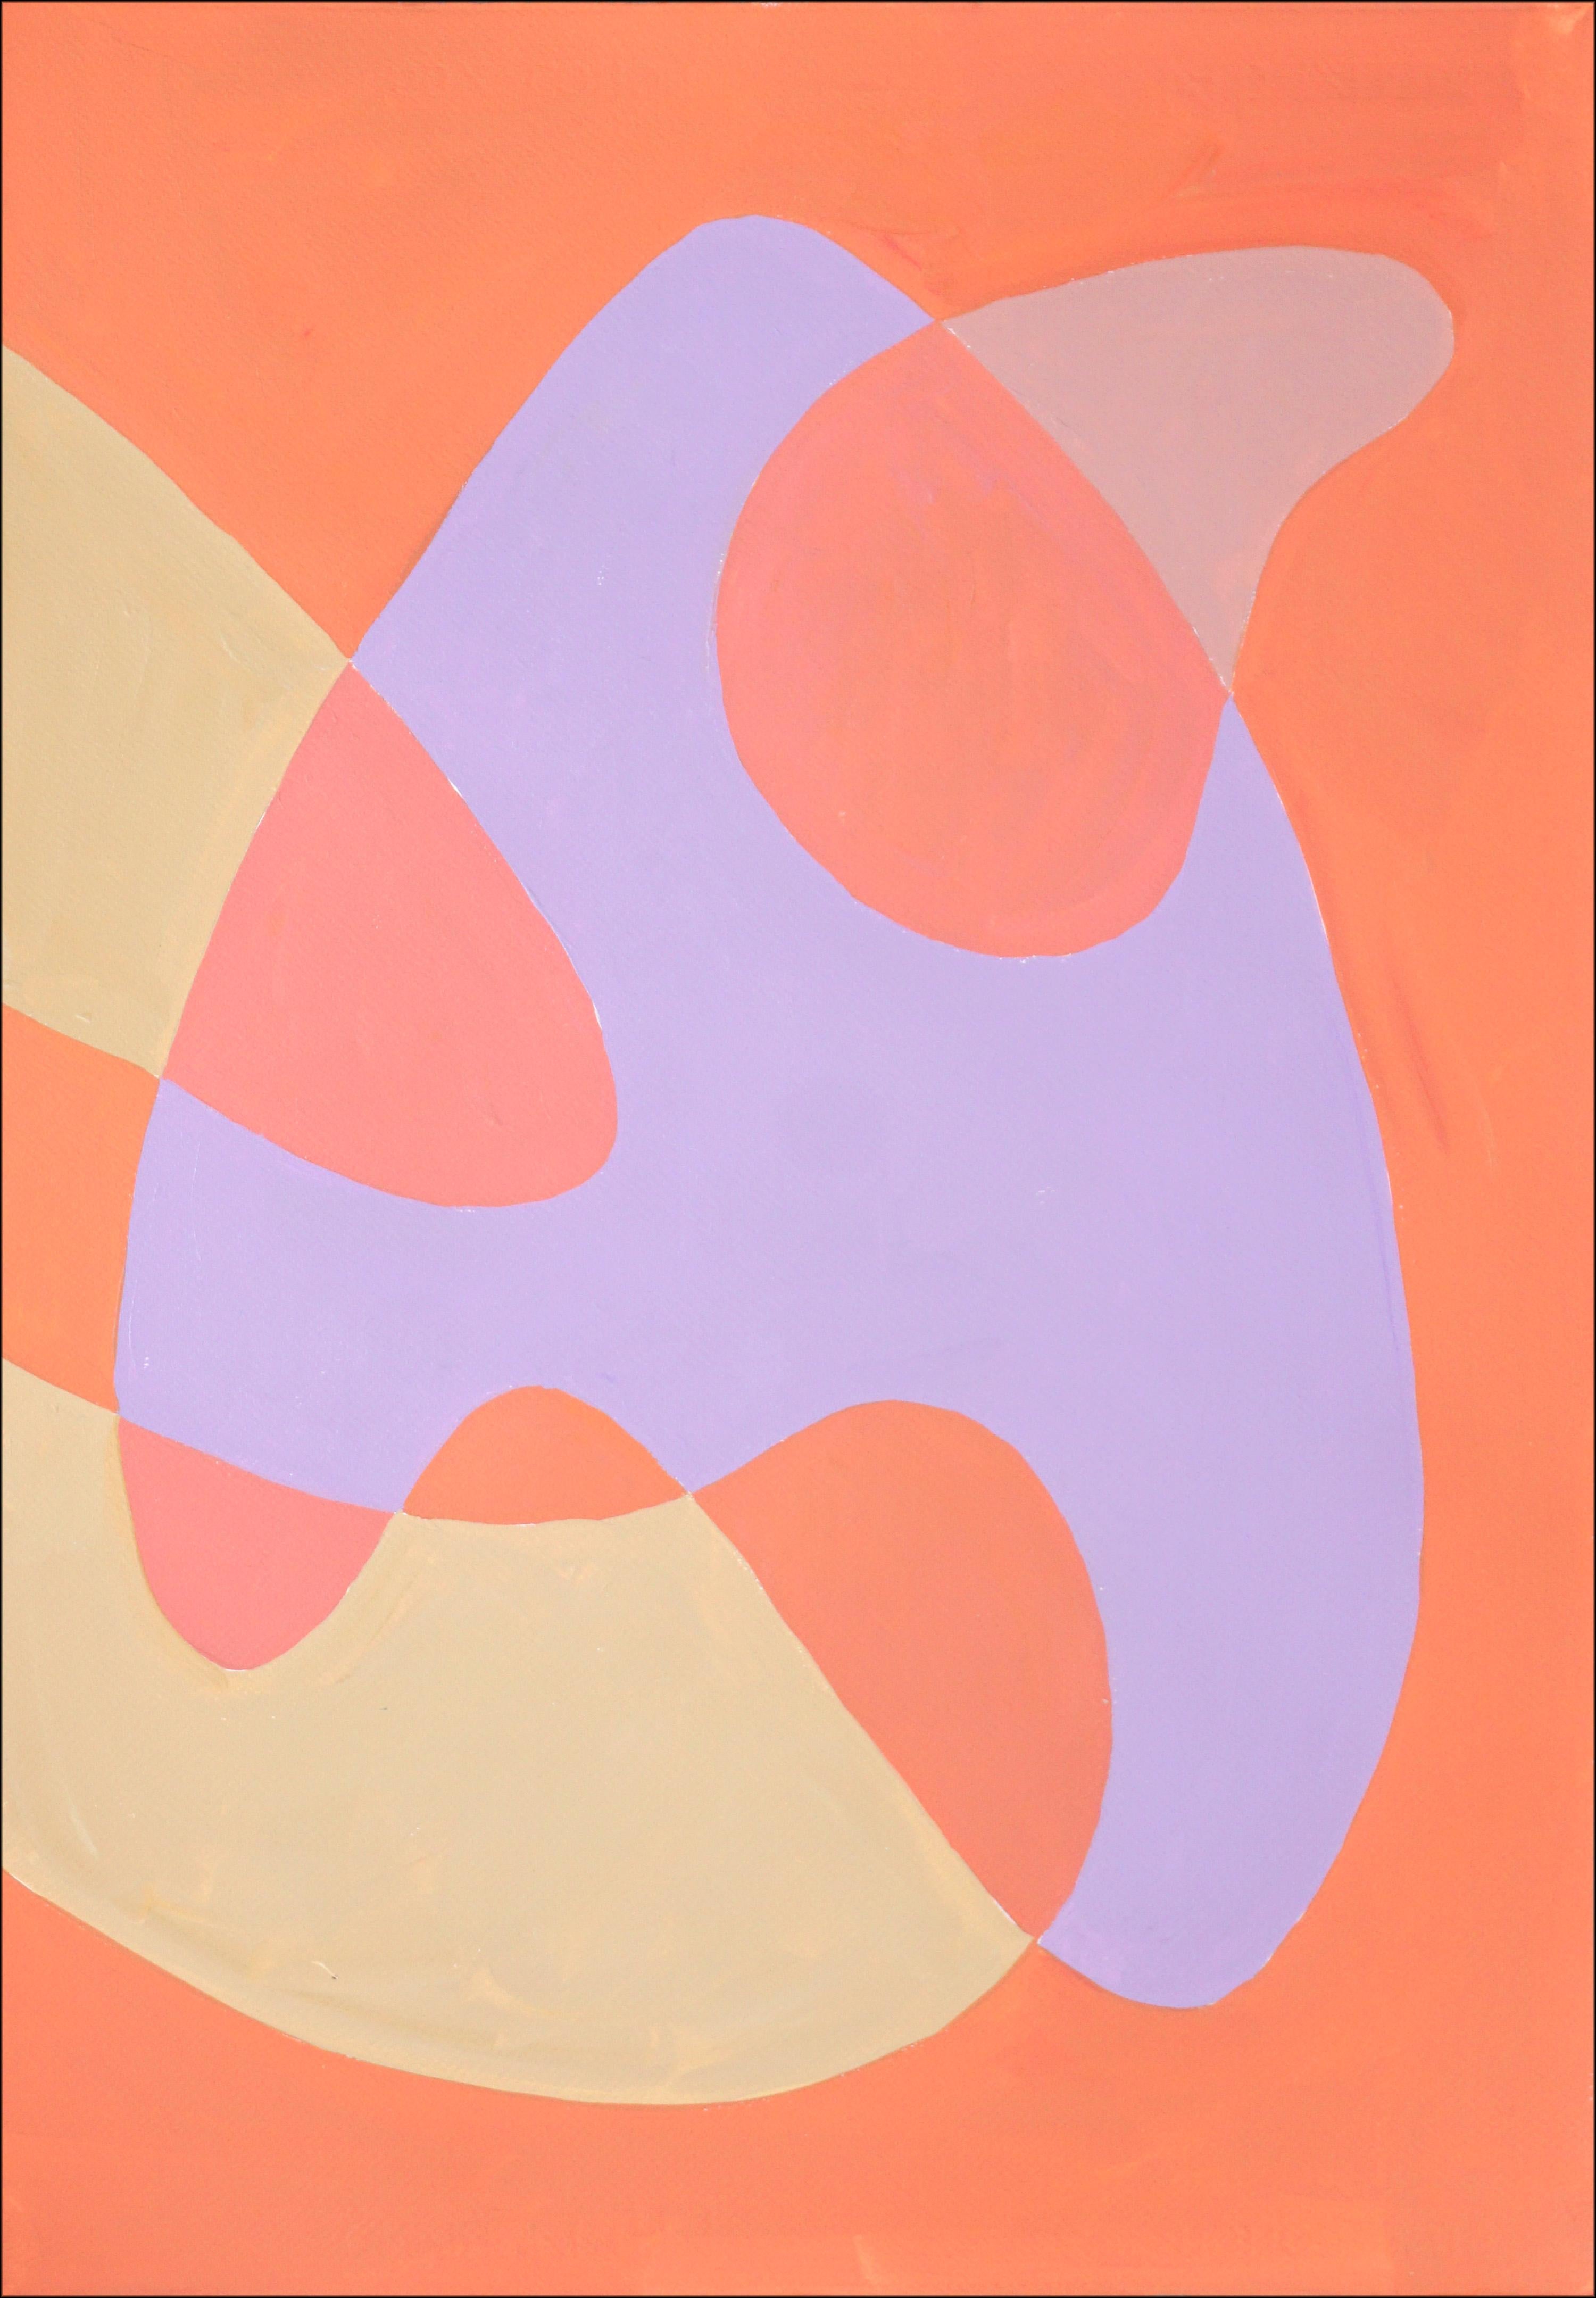 Coral Reef Abstraction, Pastel Tones Triptych Pink and Mauve, Post-Modern Shapes 2